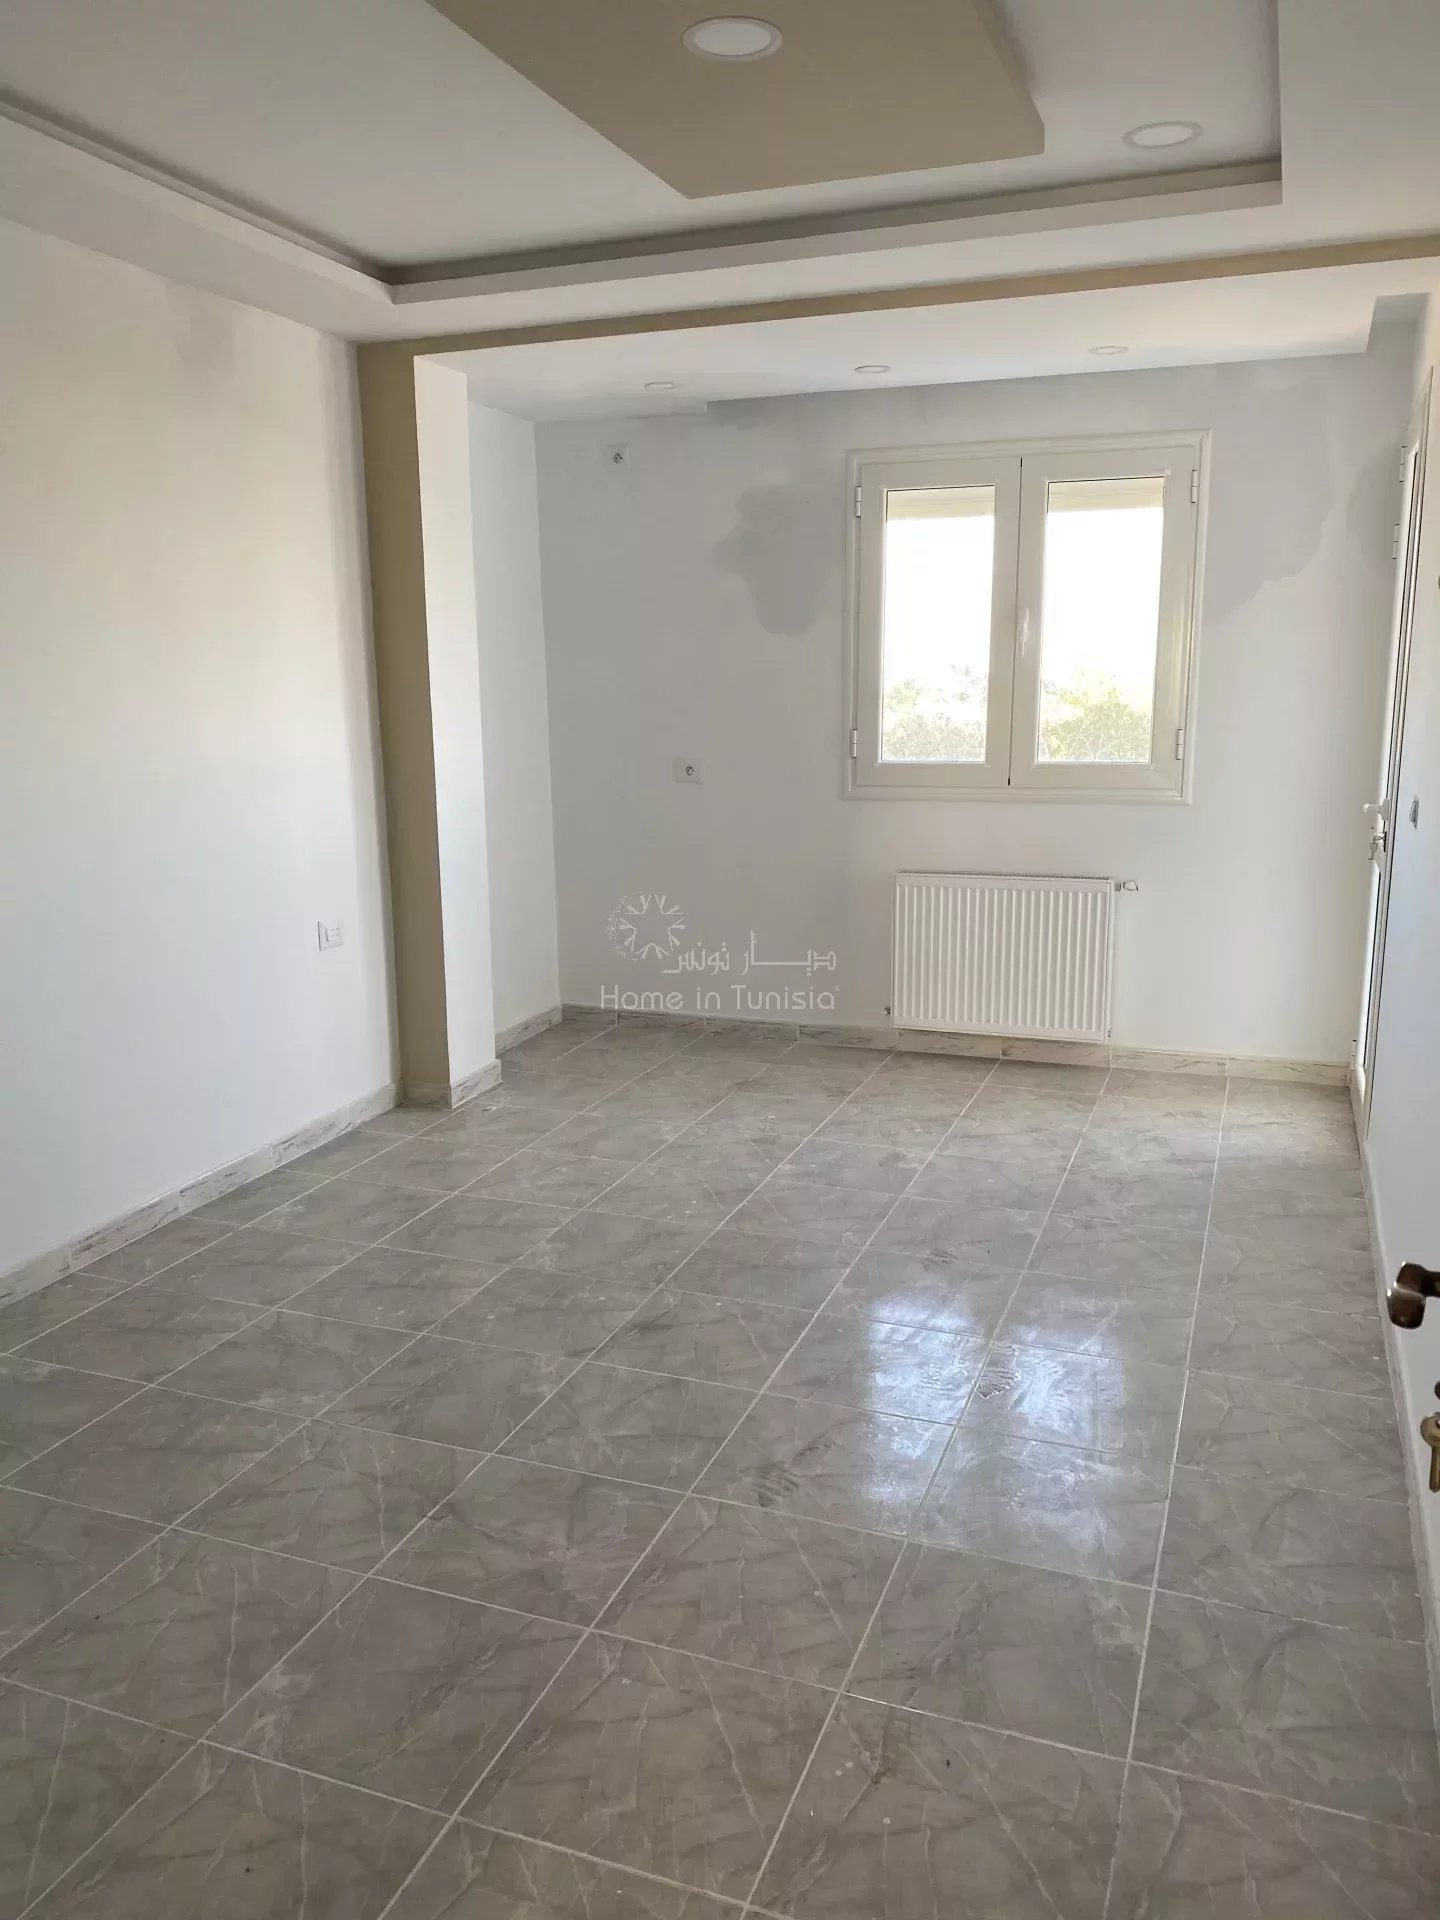 A VENDRE APPARTEMENTS S+2 HAUT STANDING A  AKOUDA